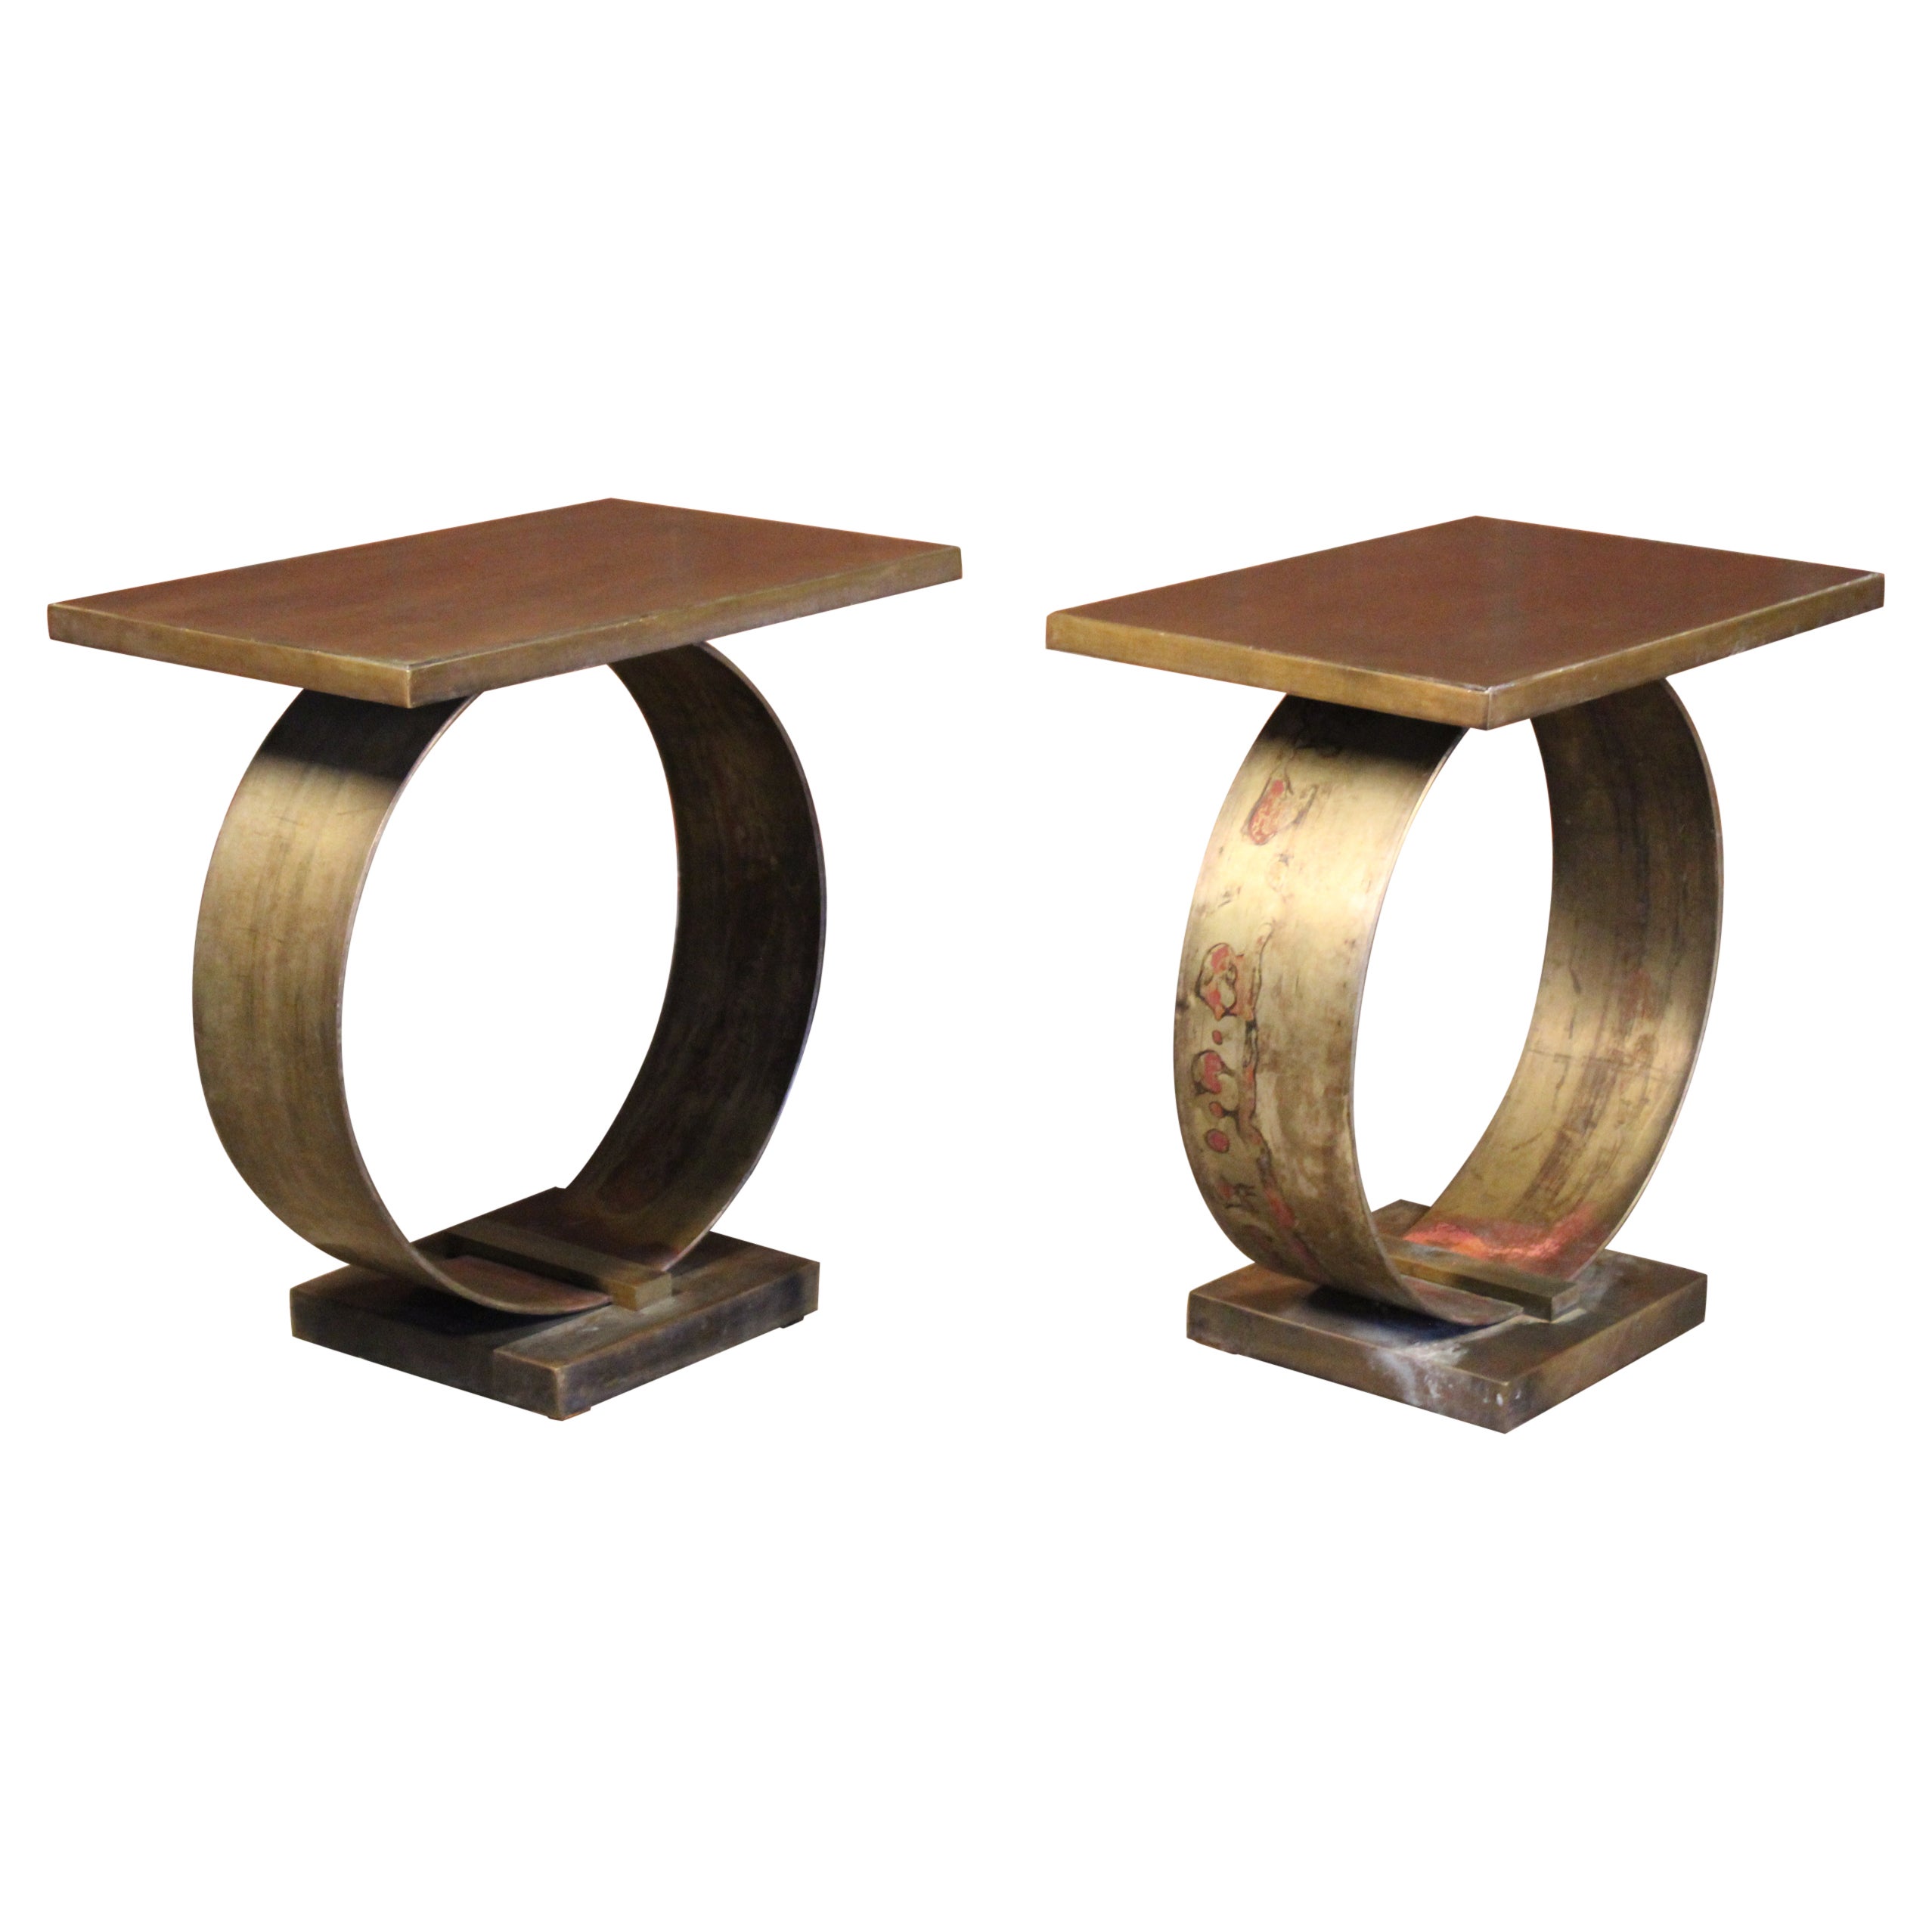 Pair of Bronze End Tables, 1970s